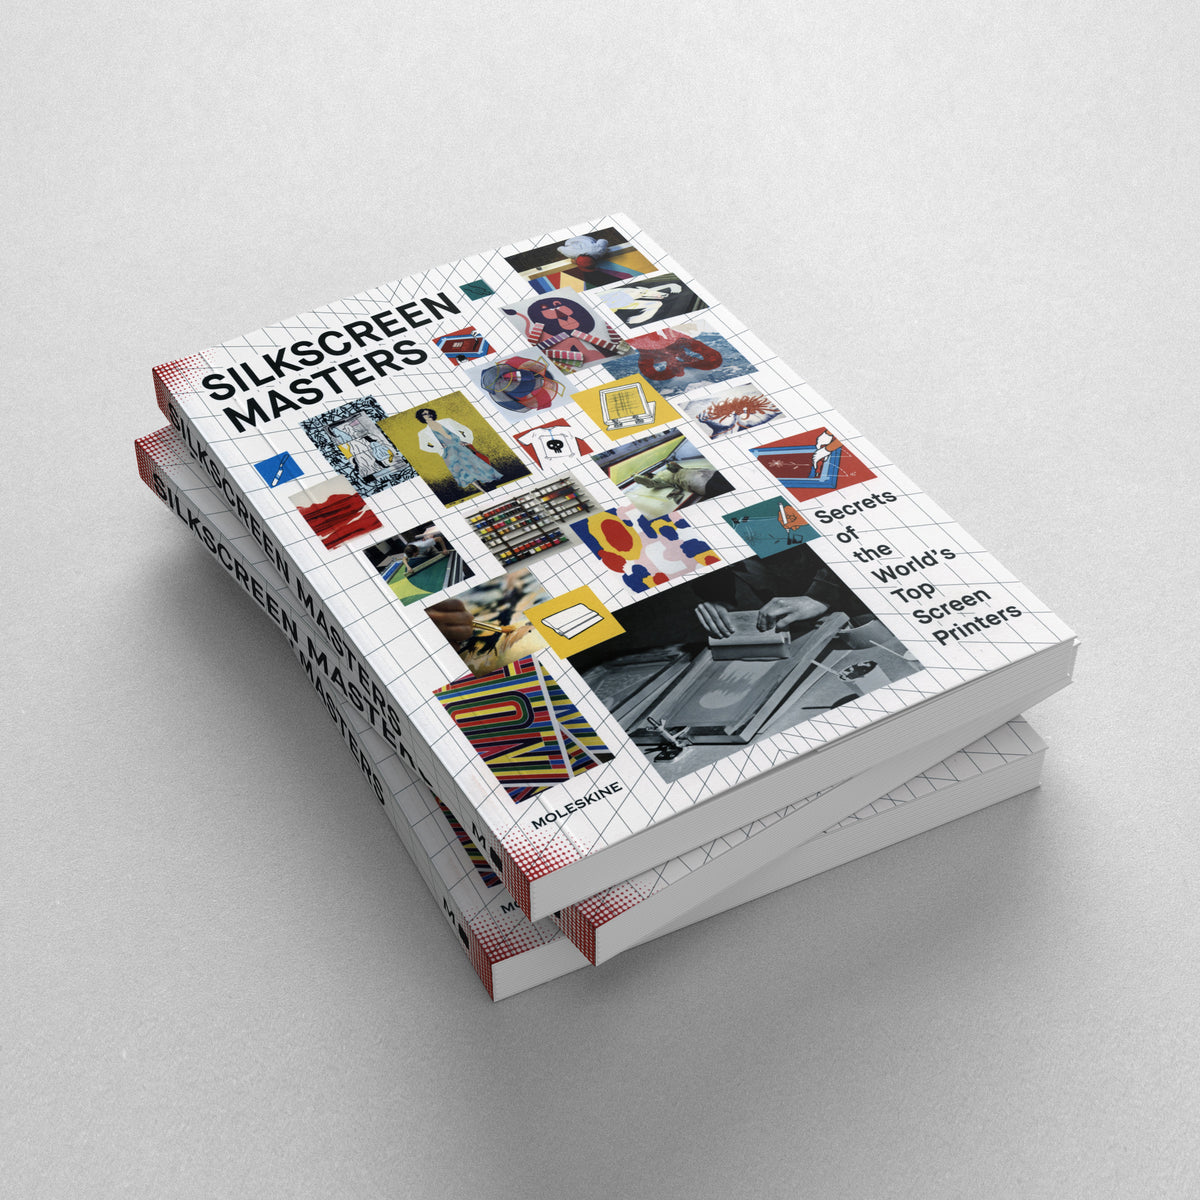 Complete Book of Silkscreen Printing & Production